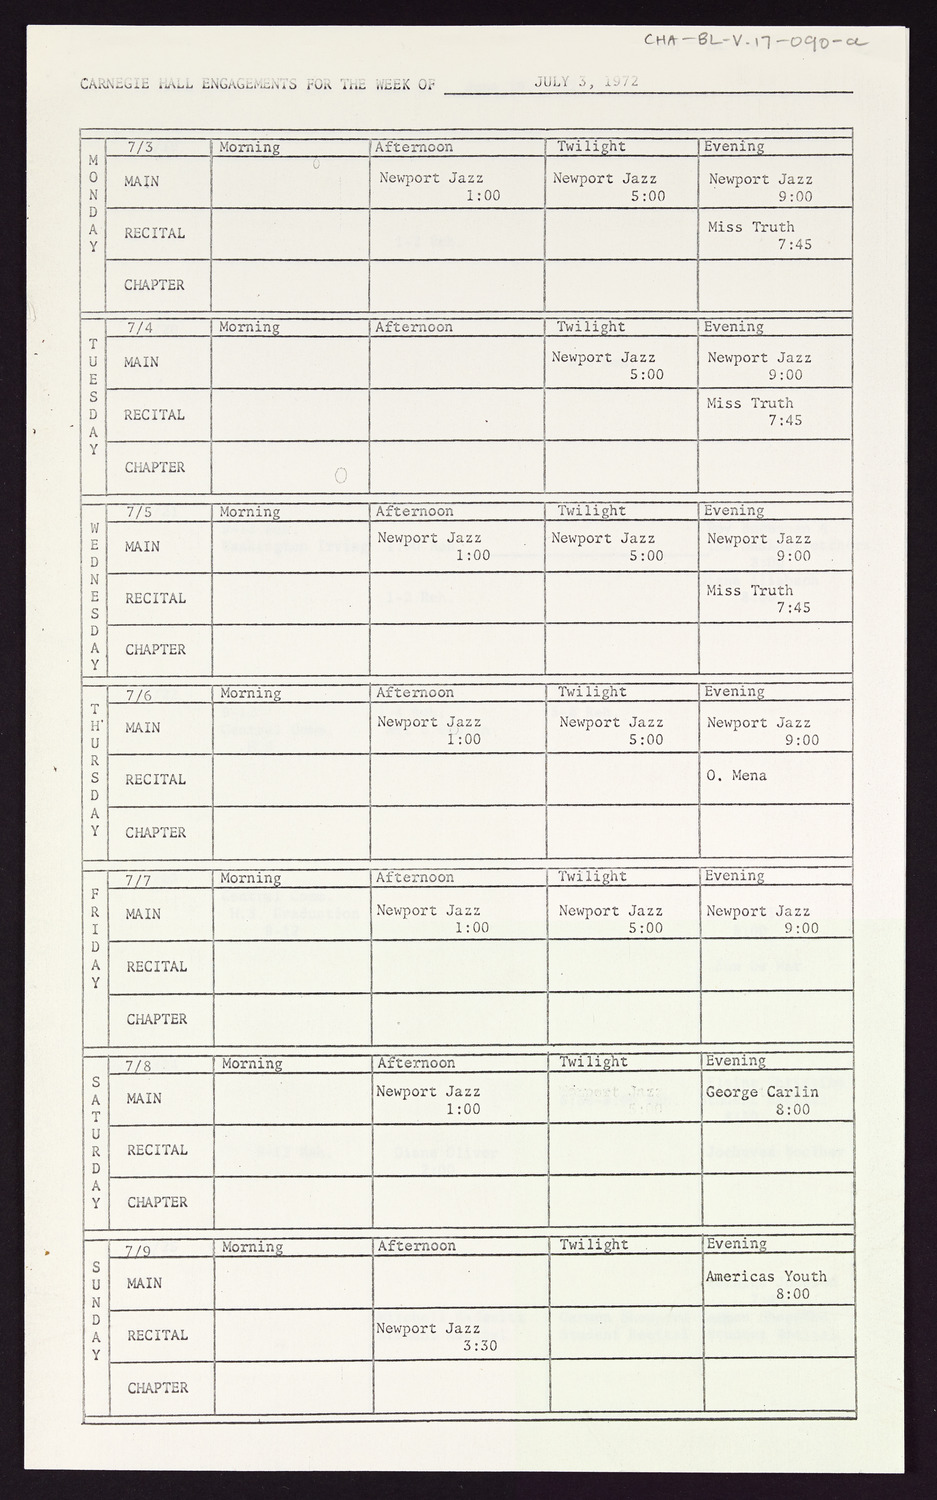 Carnegie Hall Booking Ledger, volume 17, page 90a